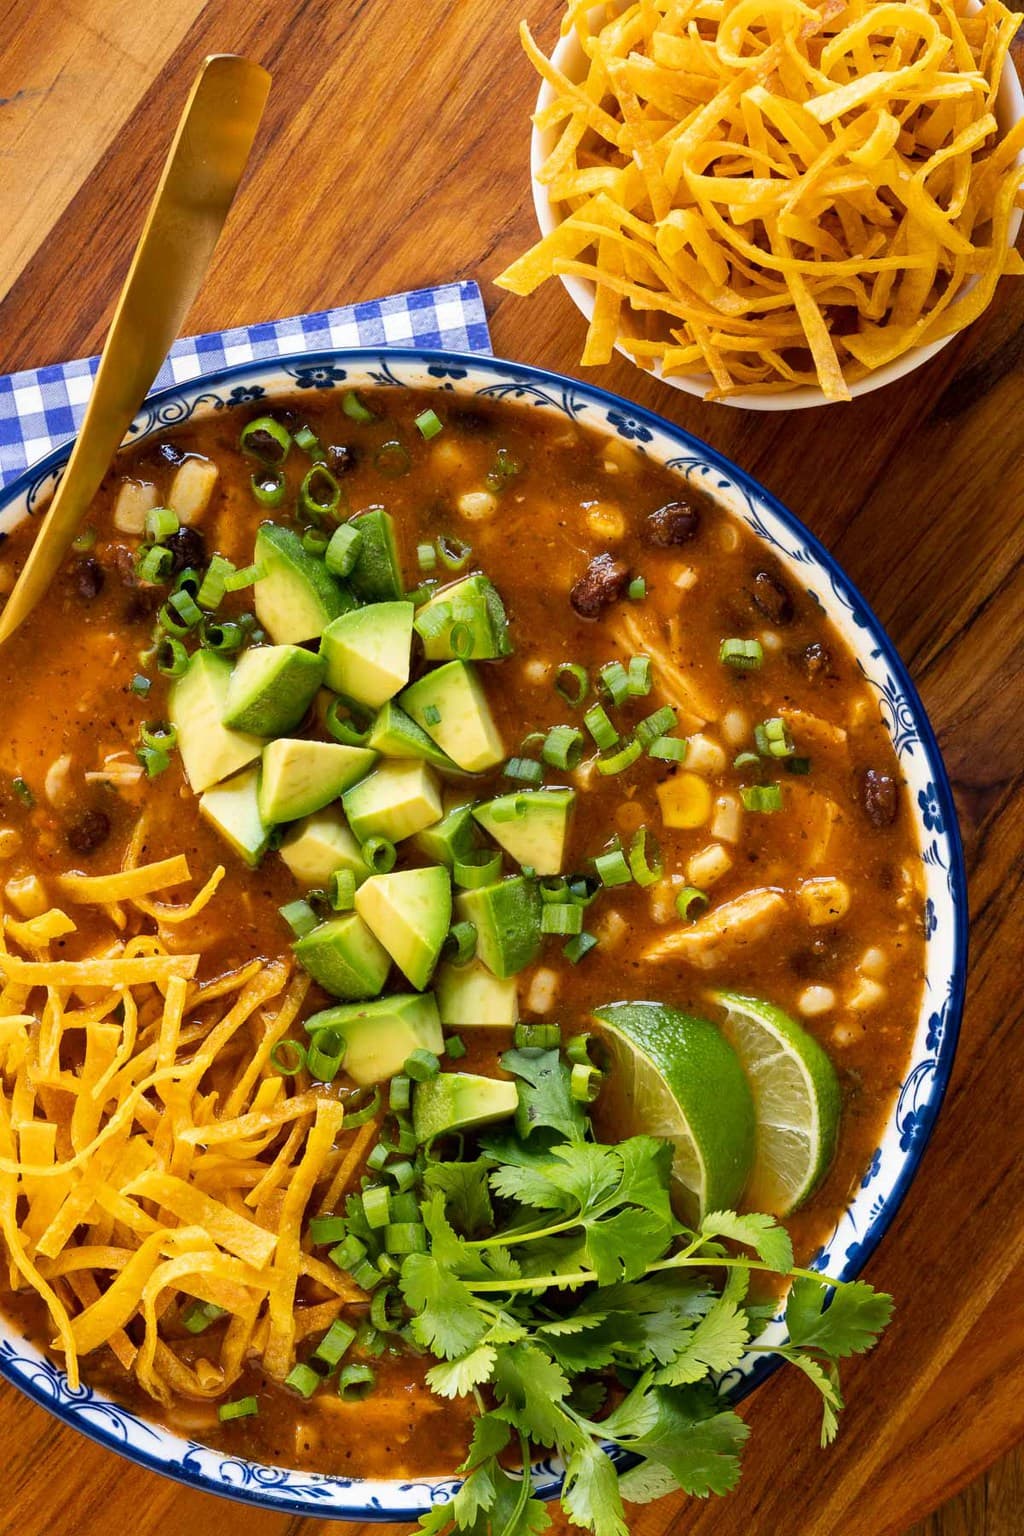 Vertical overhead photo of Southwestern Black Bean Chicken Tortilla Soup in a blue and white patterned bowl with toppings.